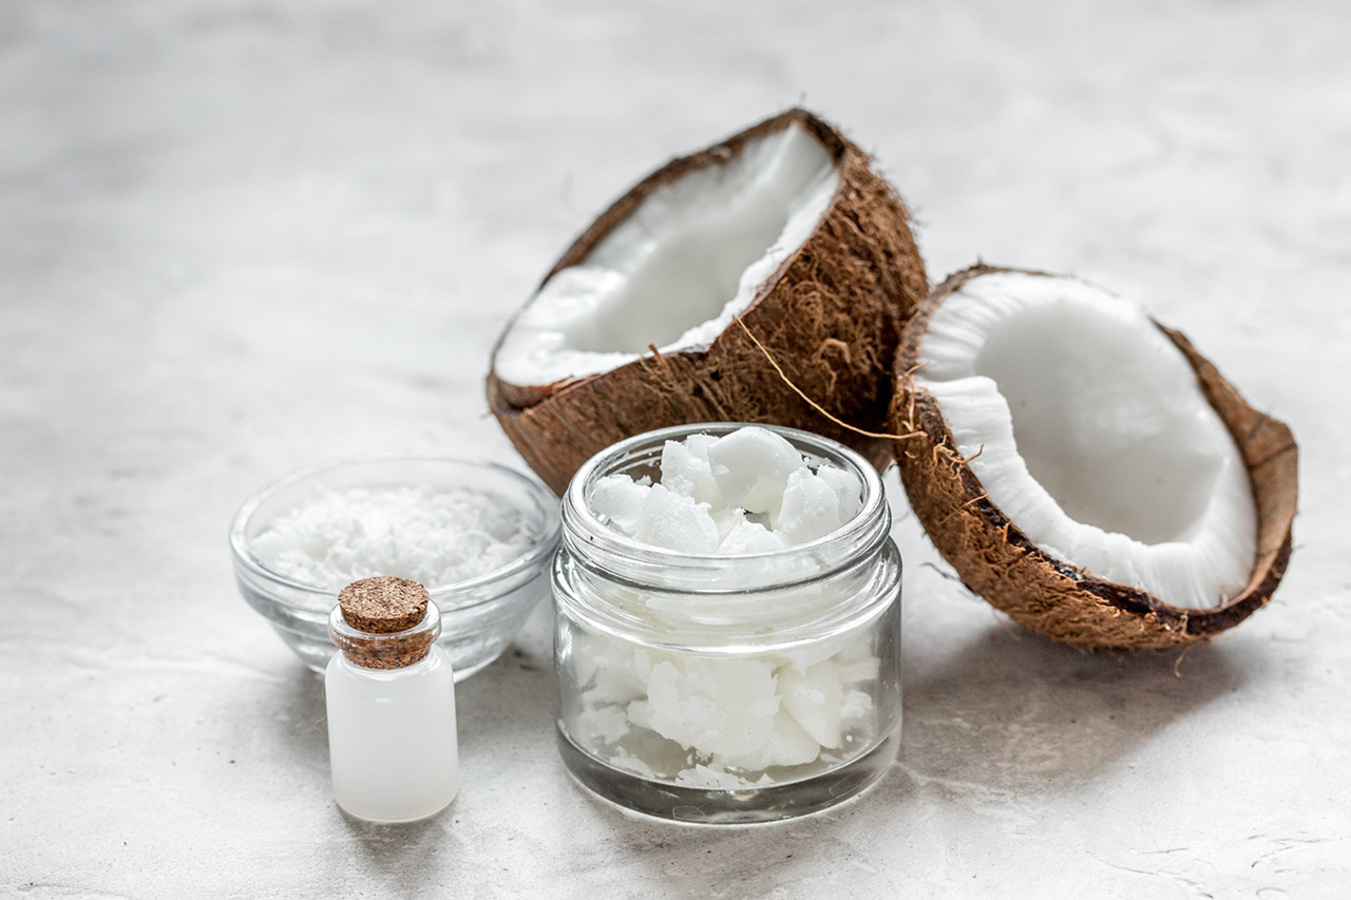 Coconut oil and vaginal health